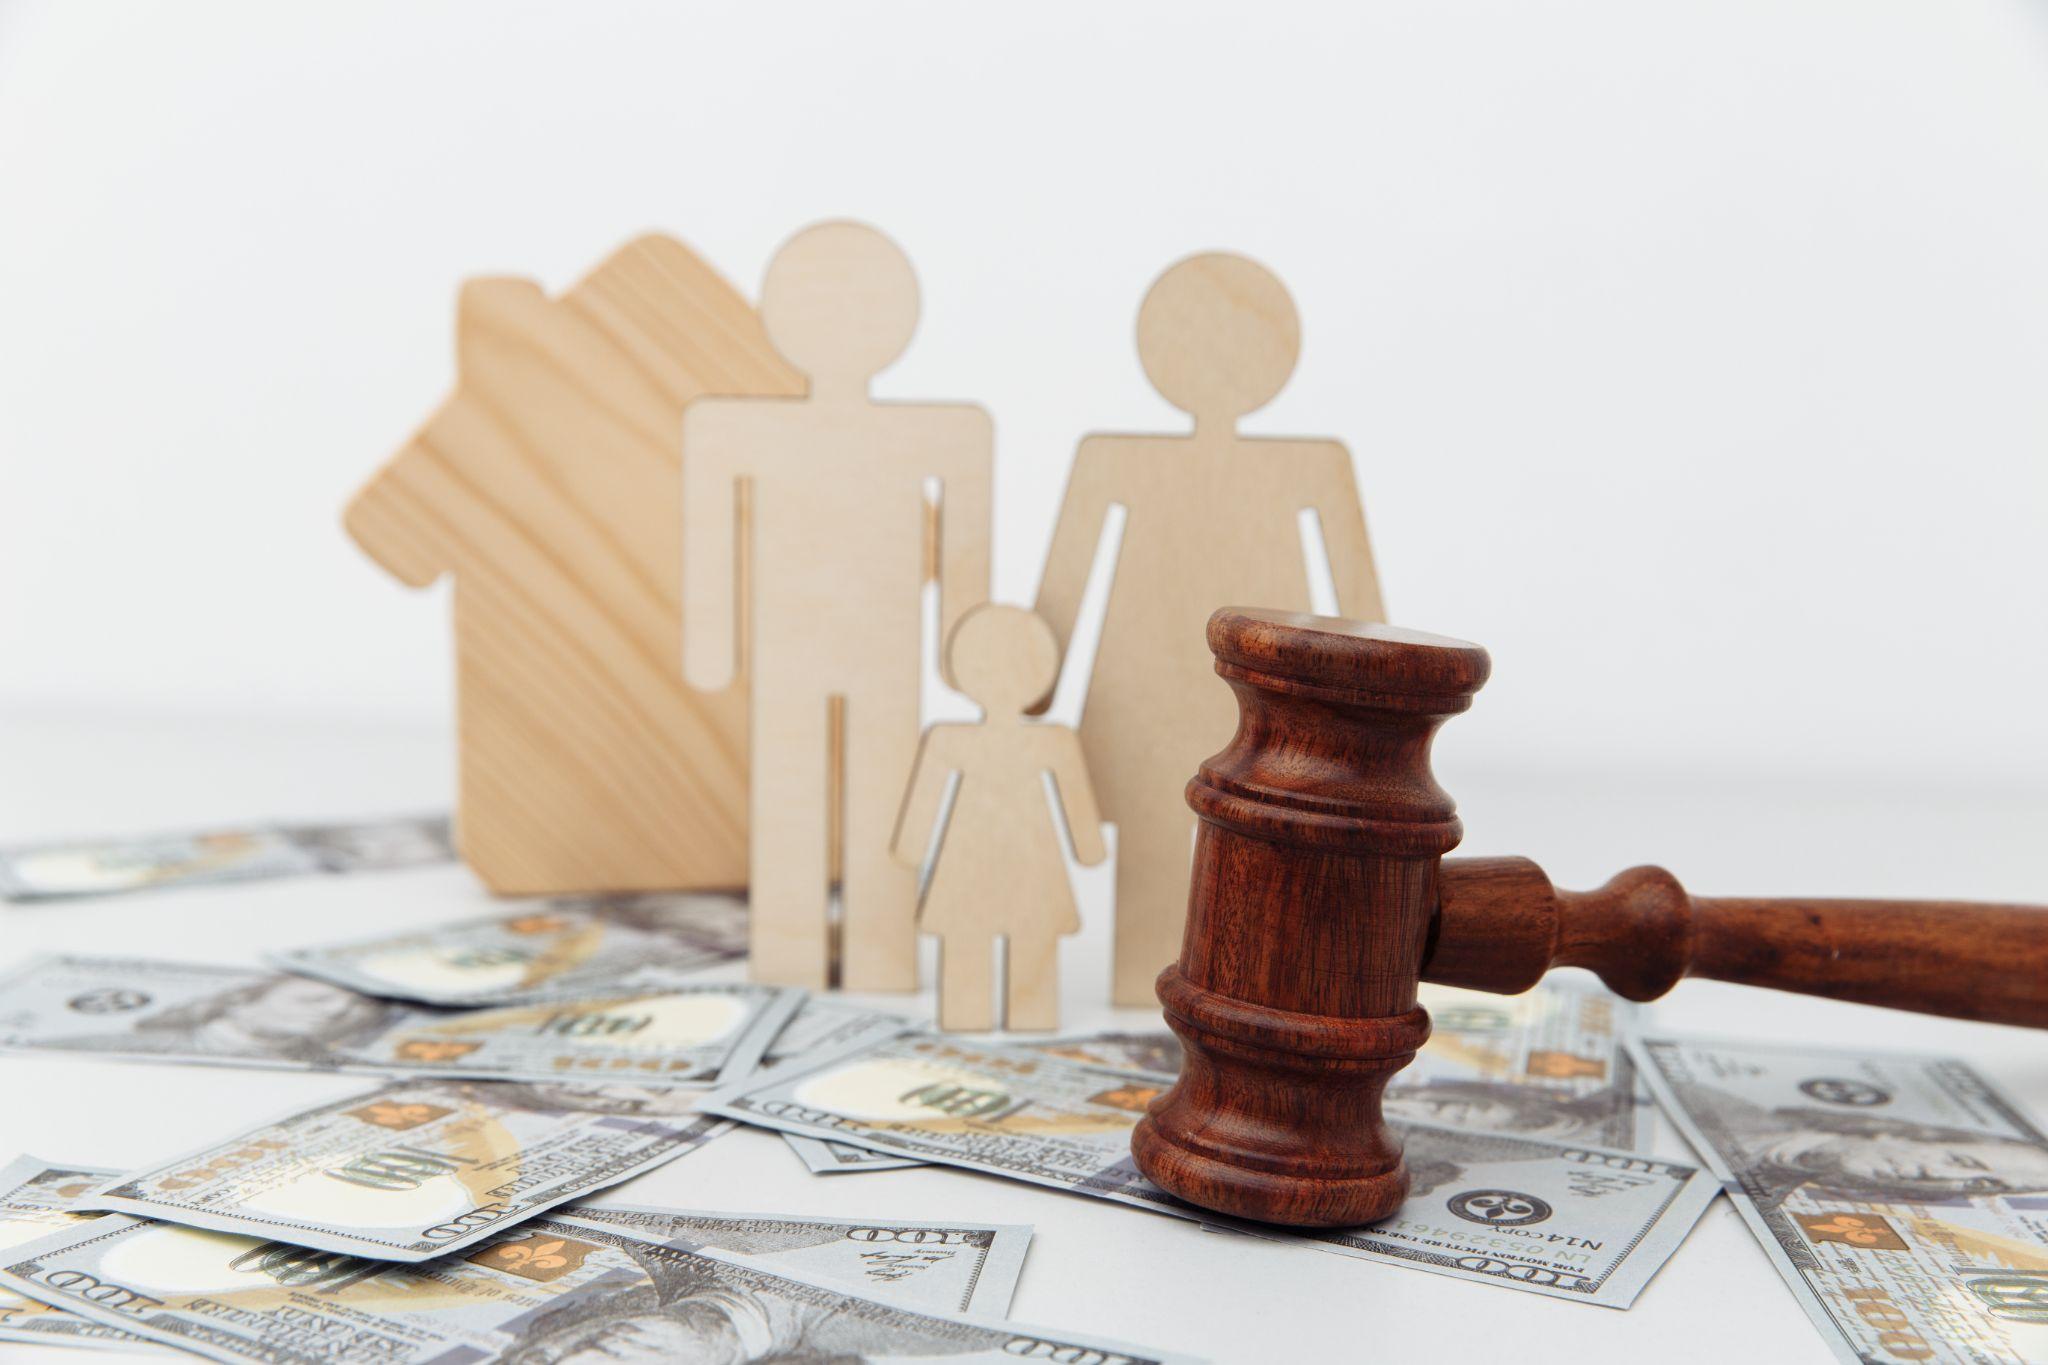 Wooden figures of a family and a house, a gavel, and scattered dollar bills on a table, symbolizing legal and financial aspects of family and property.